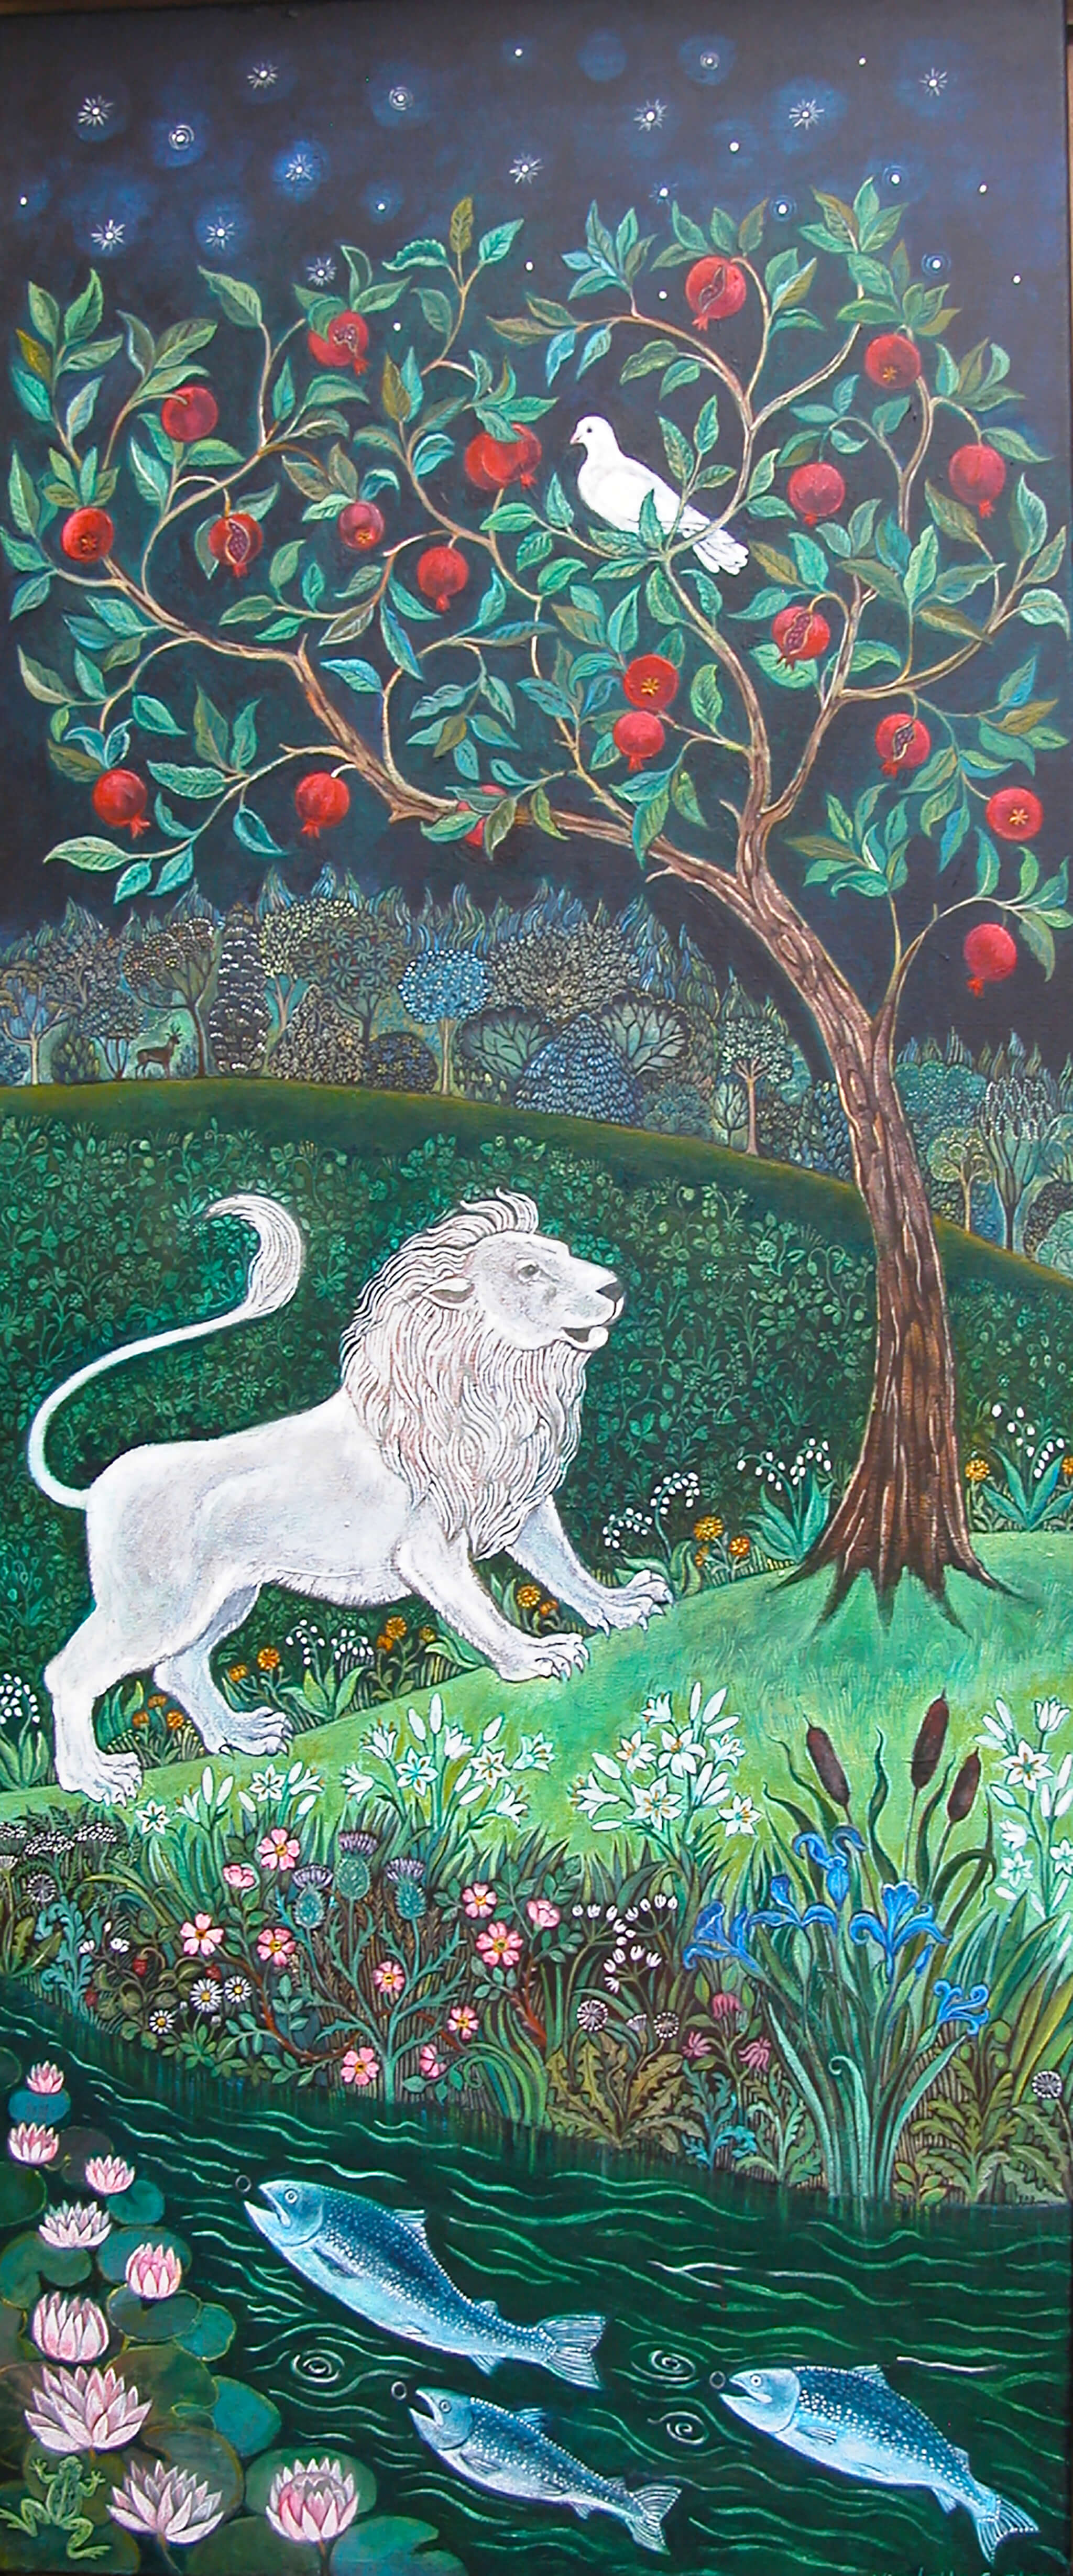 White Lion by Nicolette Carter